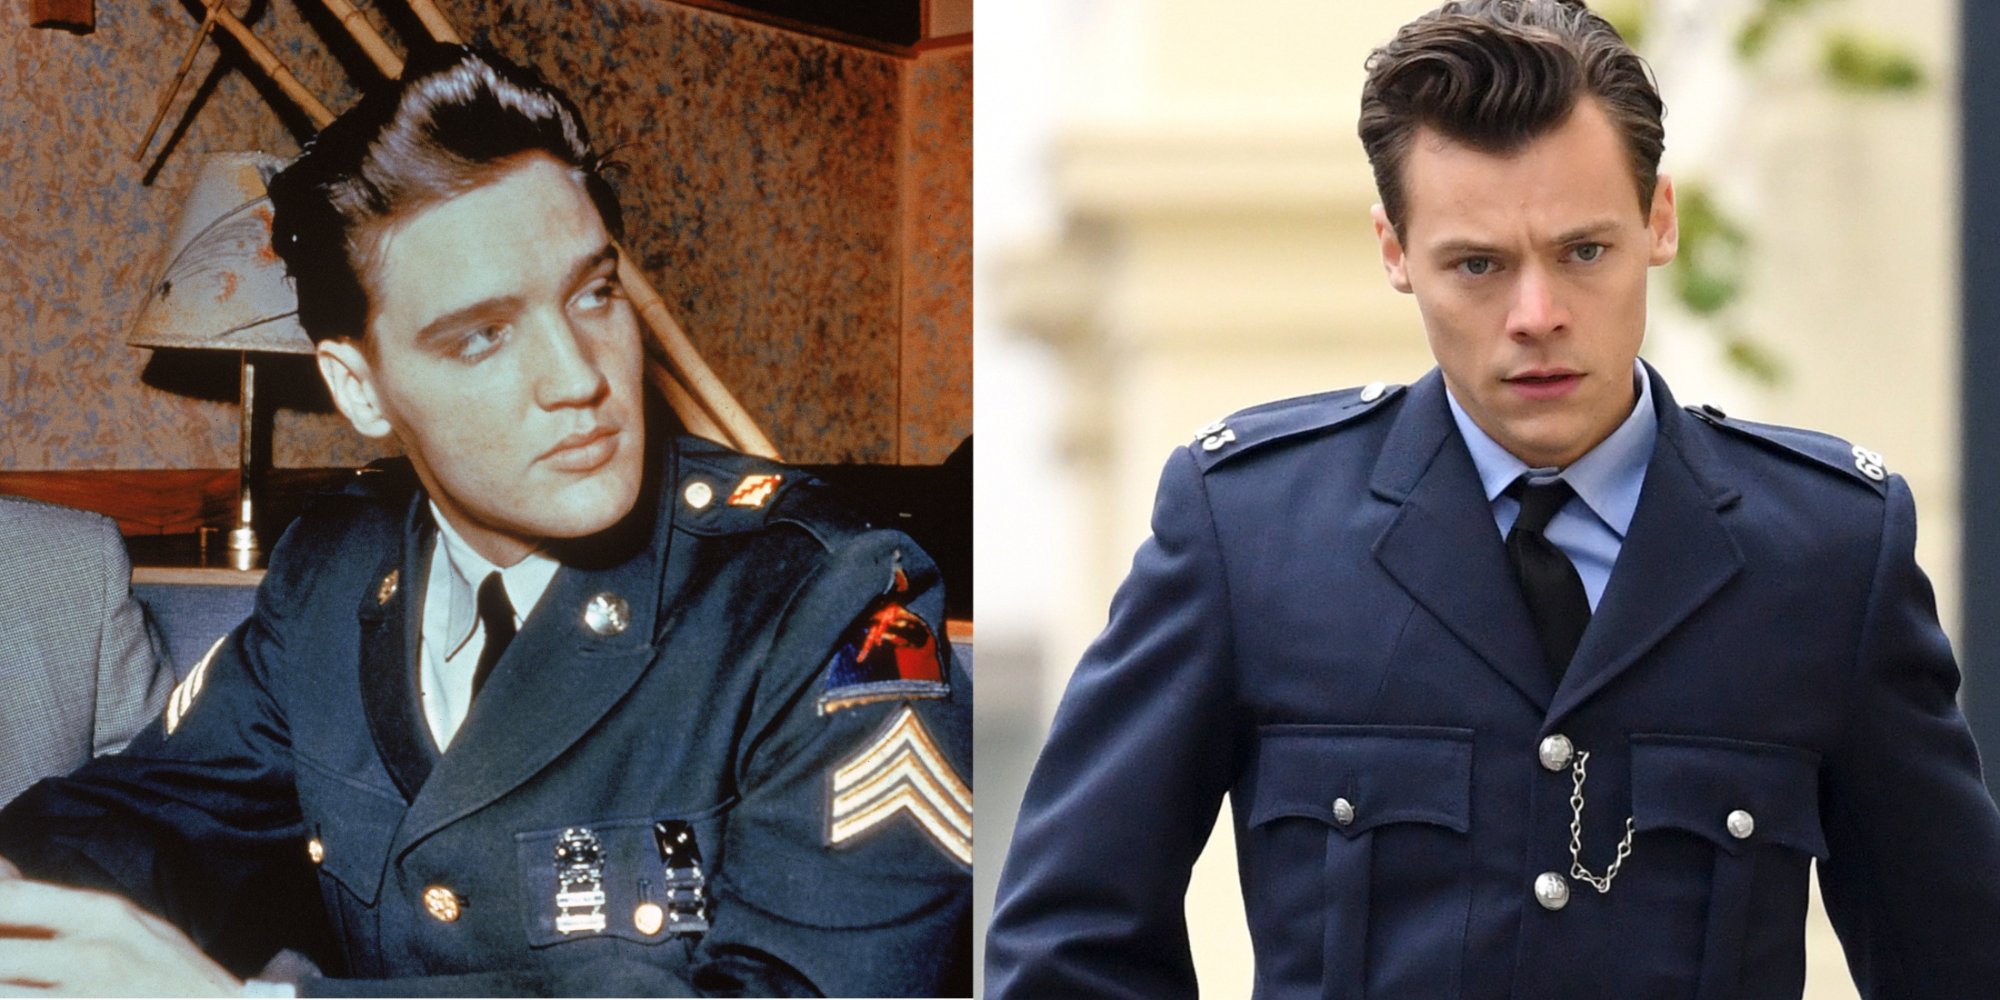 Elvis Presley and Harry Styles in side-by-side photographs wearing uniforms.